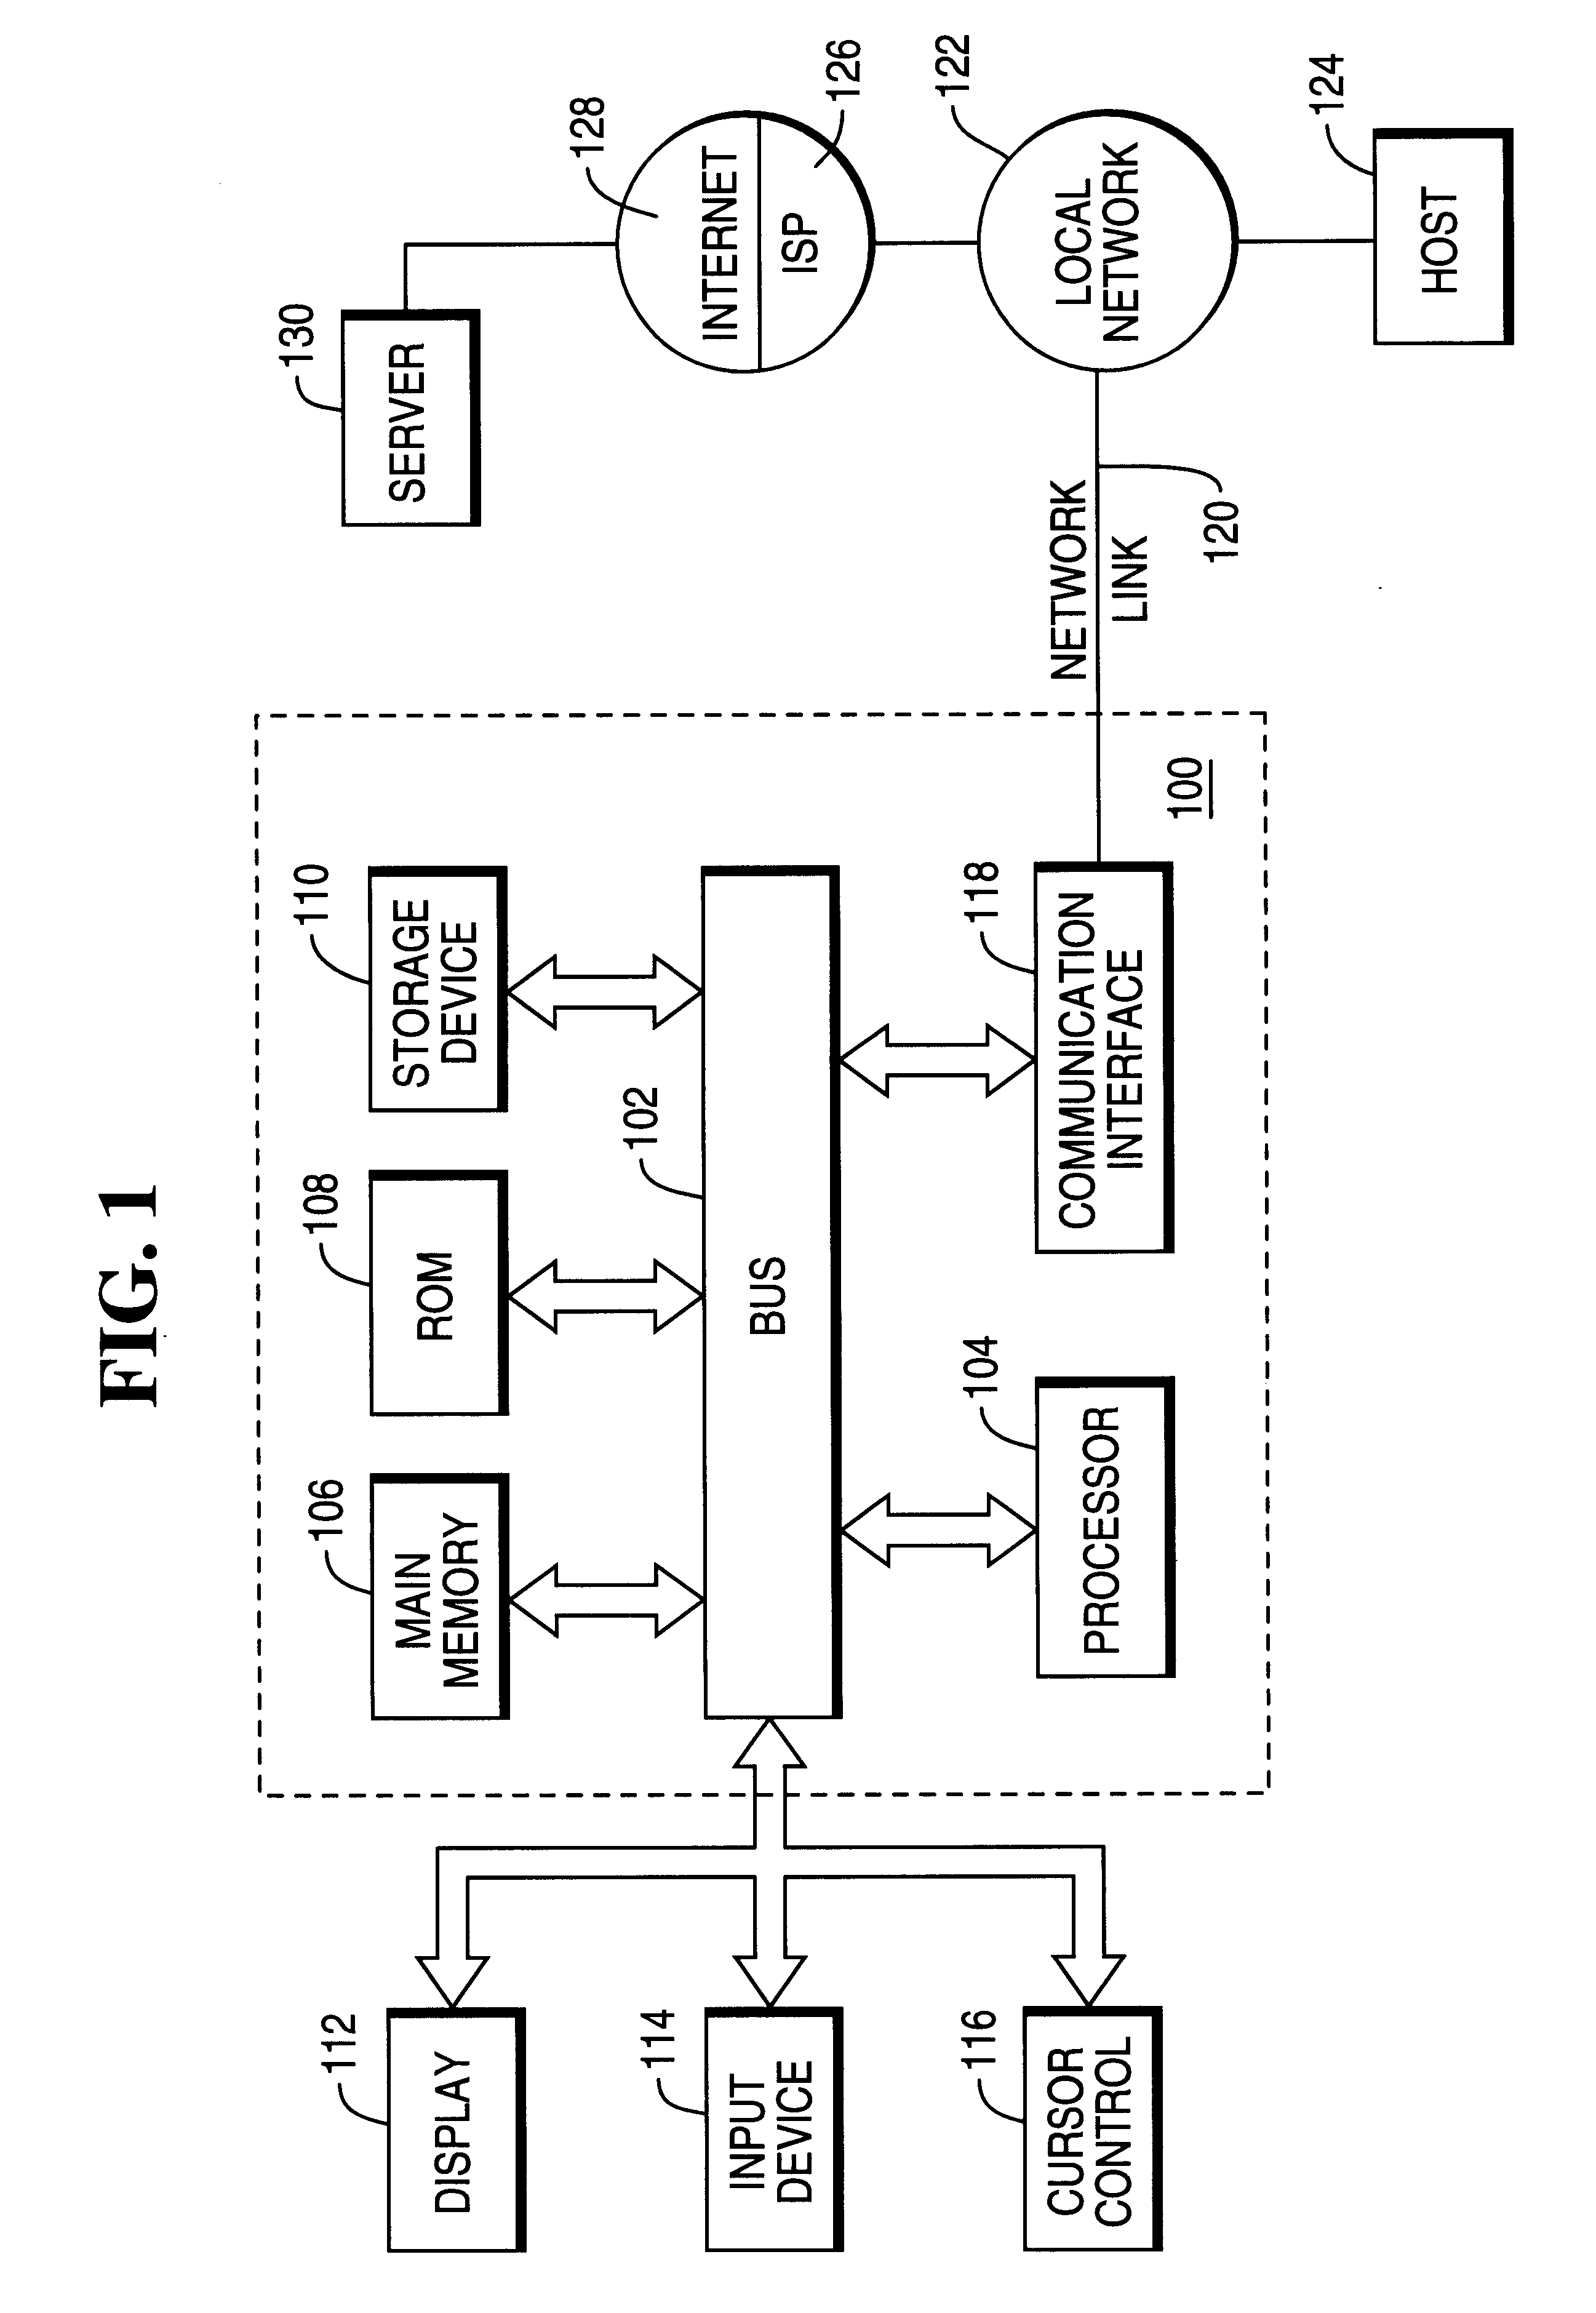 Method for customer segmentation with applications to electronic commerce